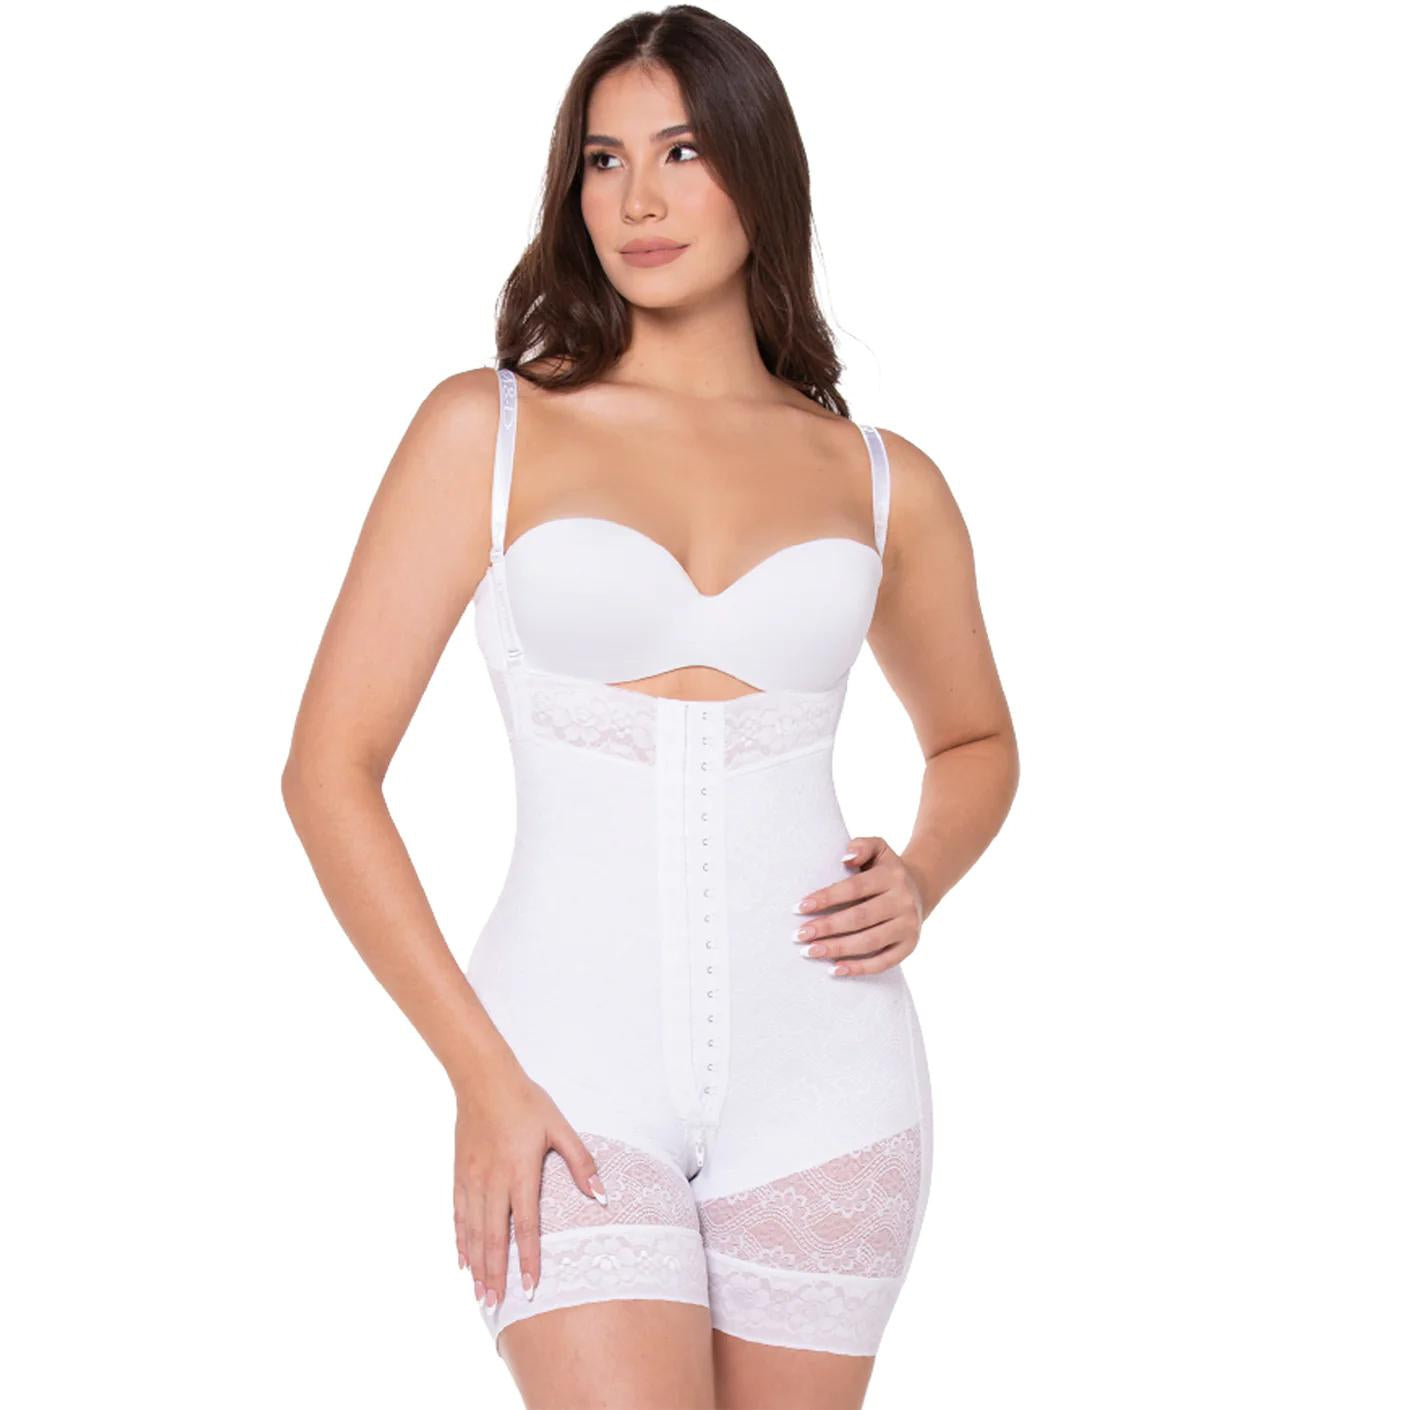 Strapless colombian Faja adjustable straps - Post surgery Body shapers and Compression  Garments - Productos de Colombia.com